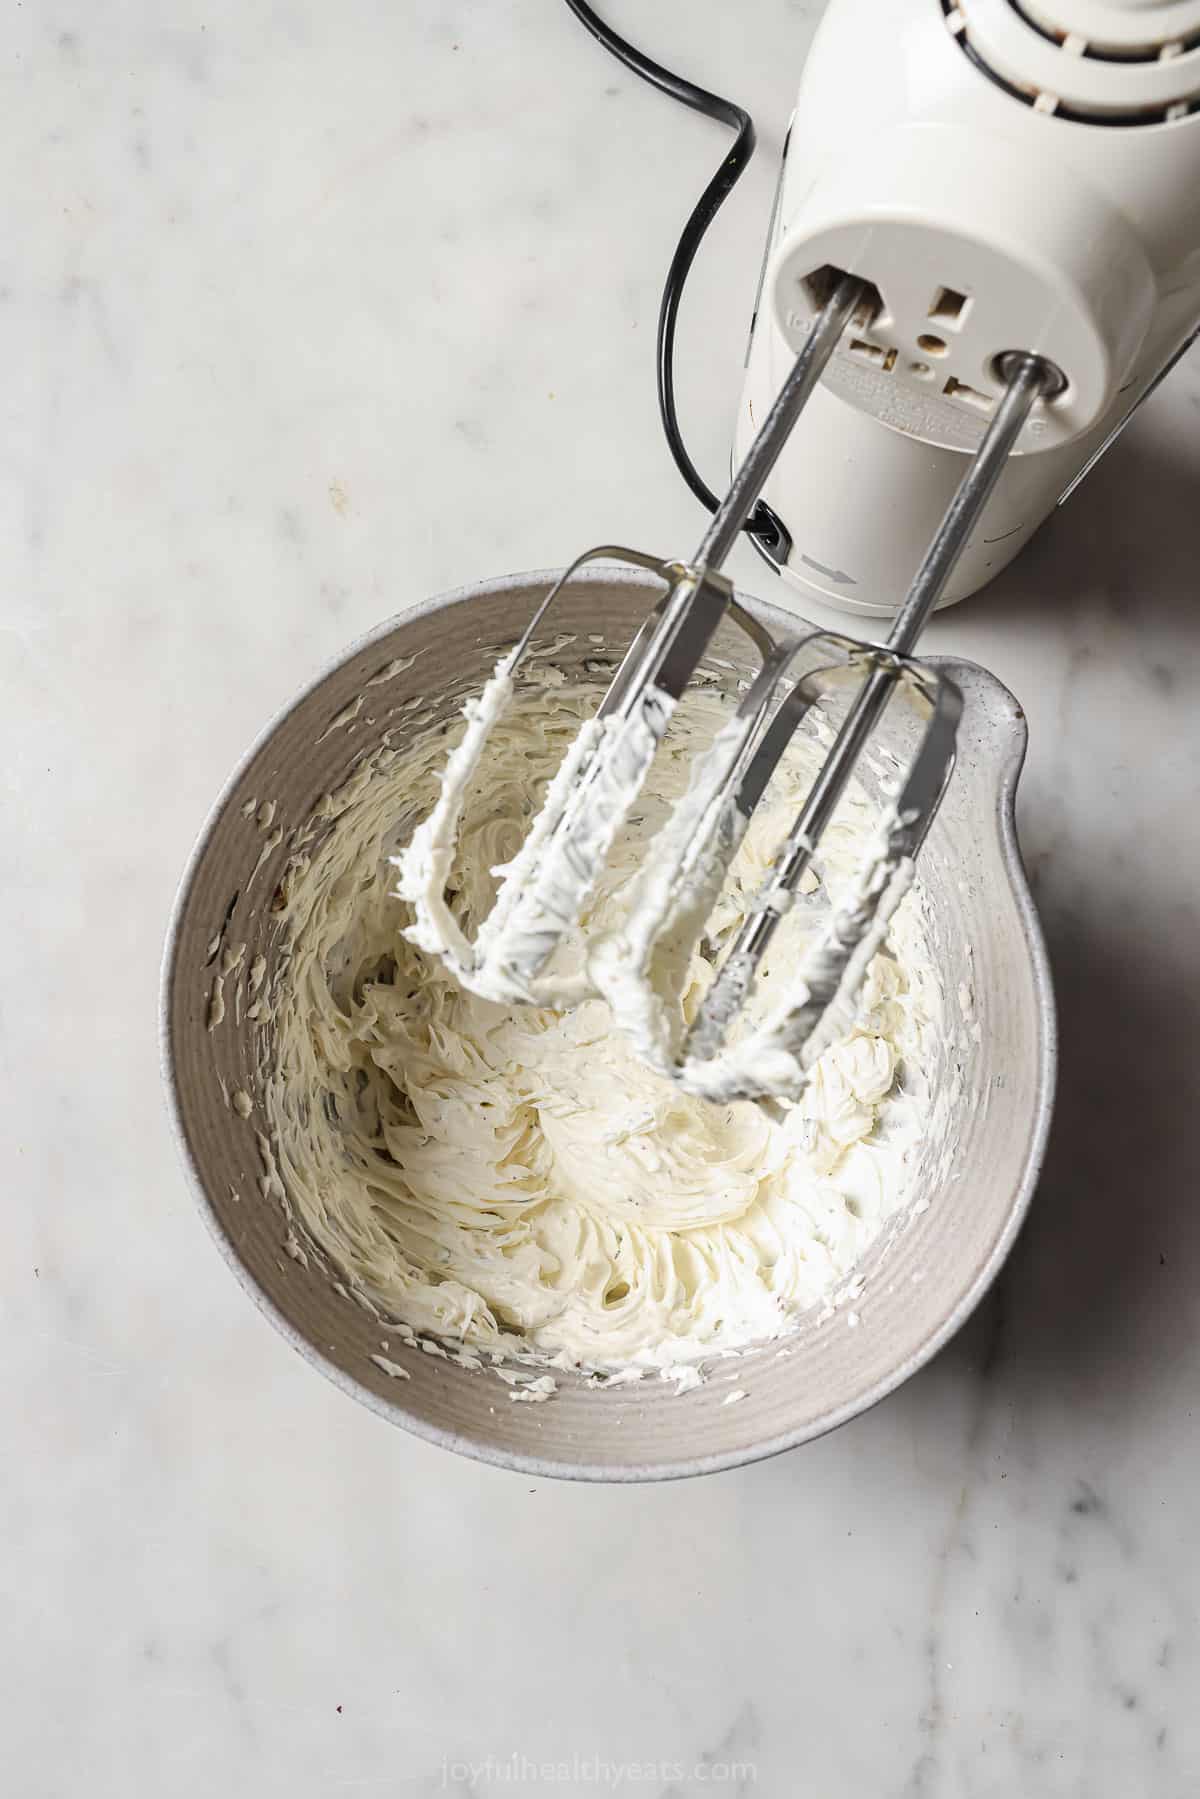 Beating the cream cheese mixture in a bowl. 